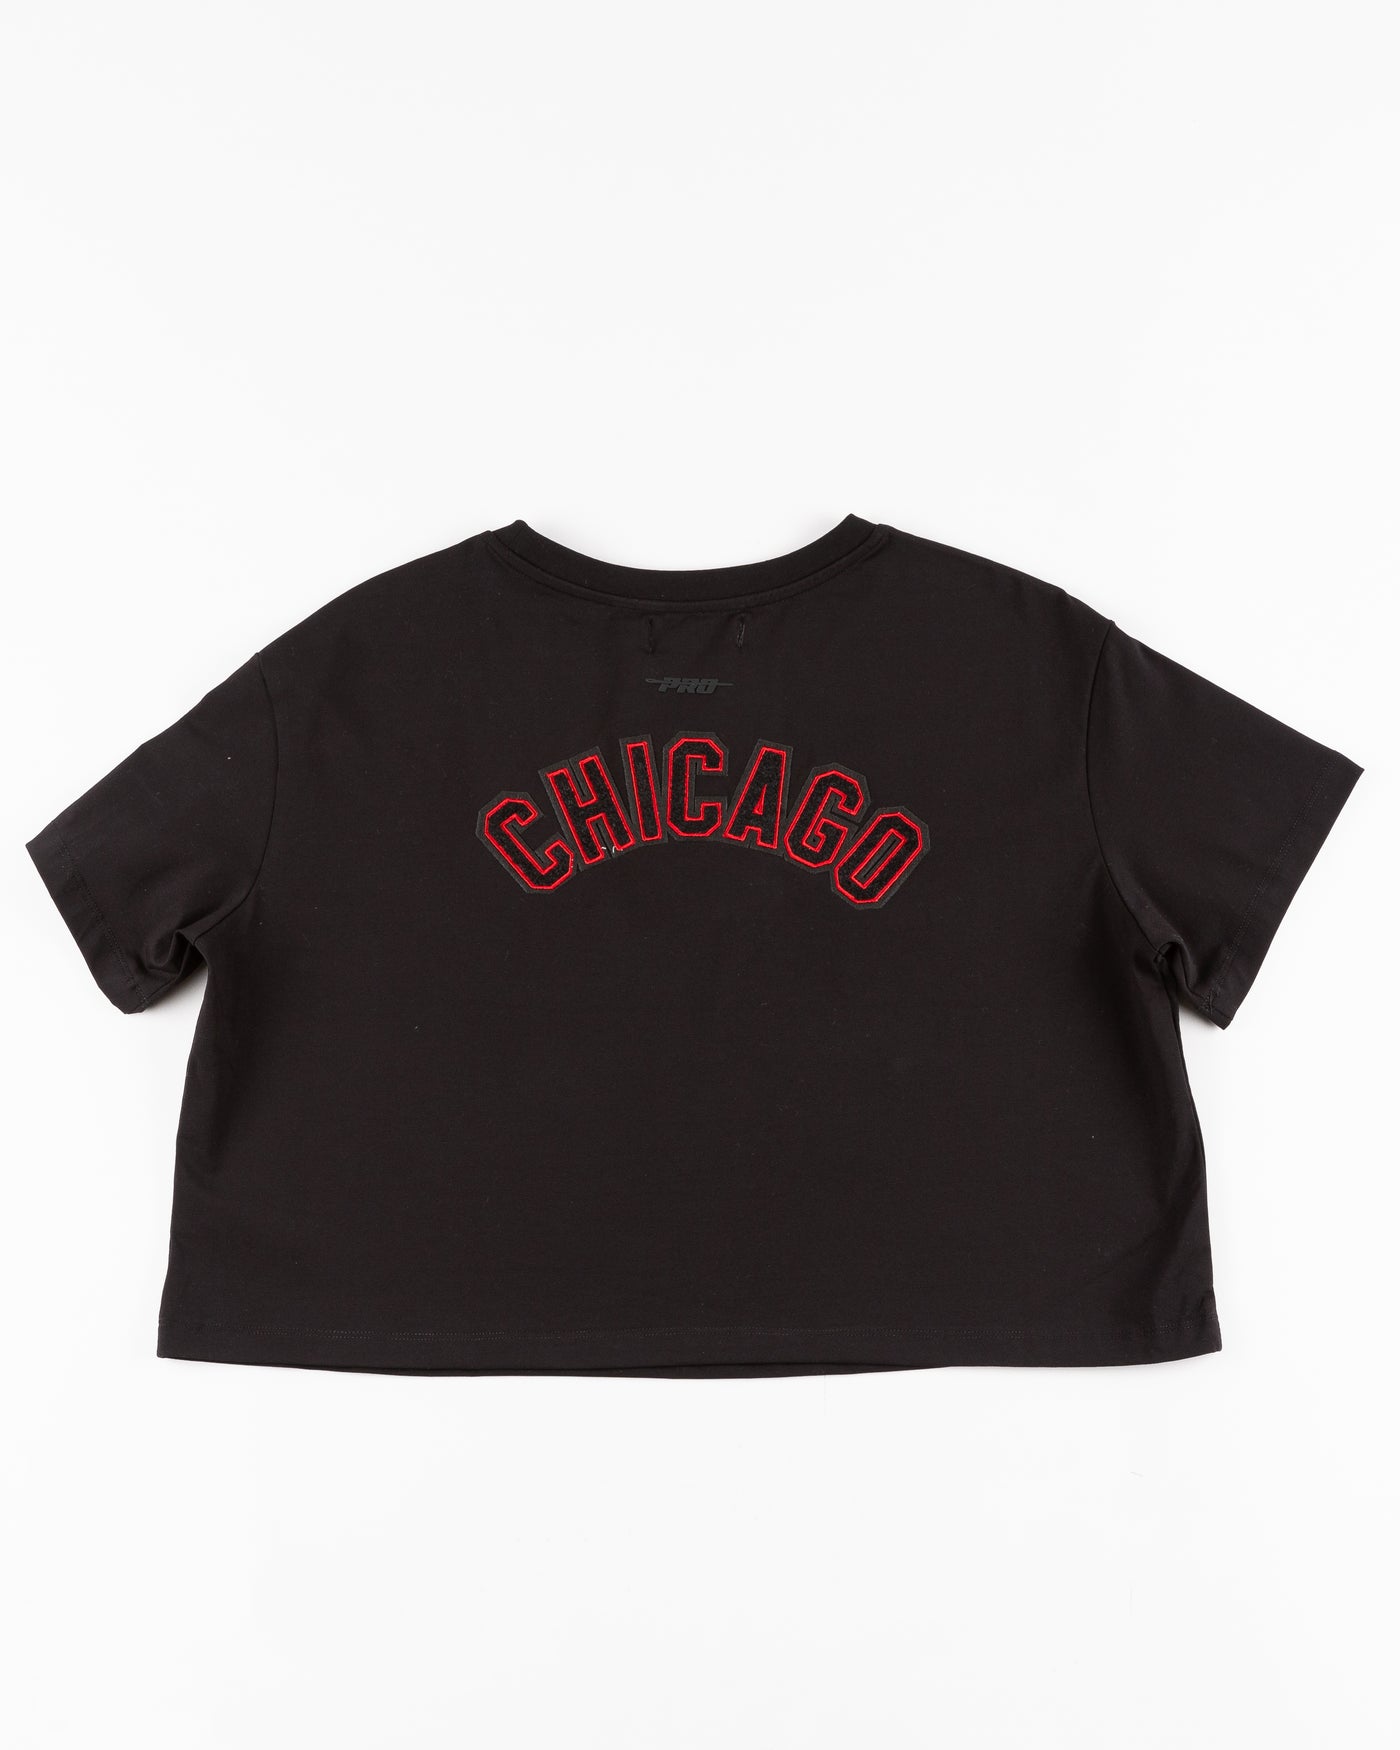 black cropped tee with embroidered Chicago Blackhawks patches on chest, shoulder and back - back lay flat